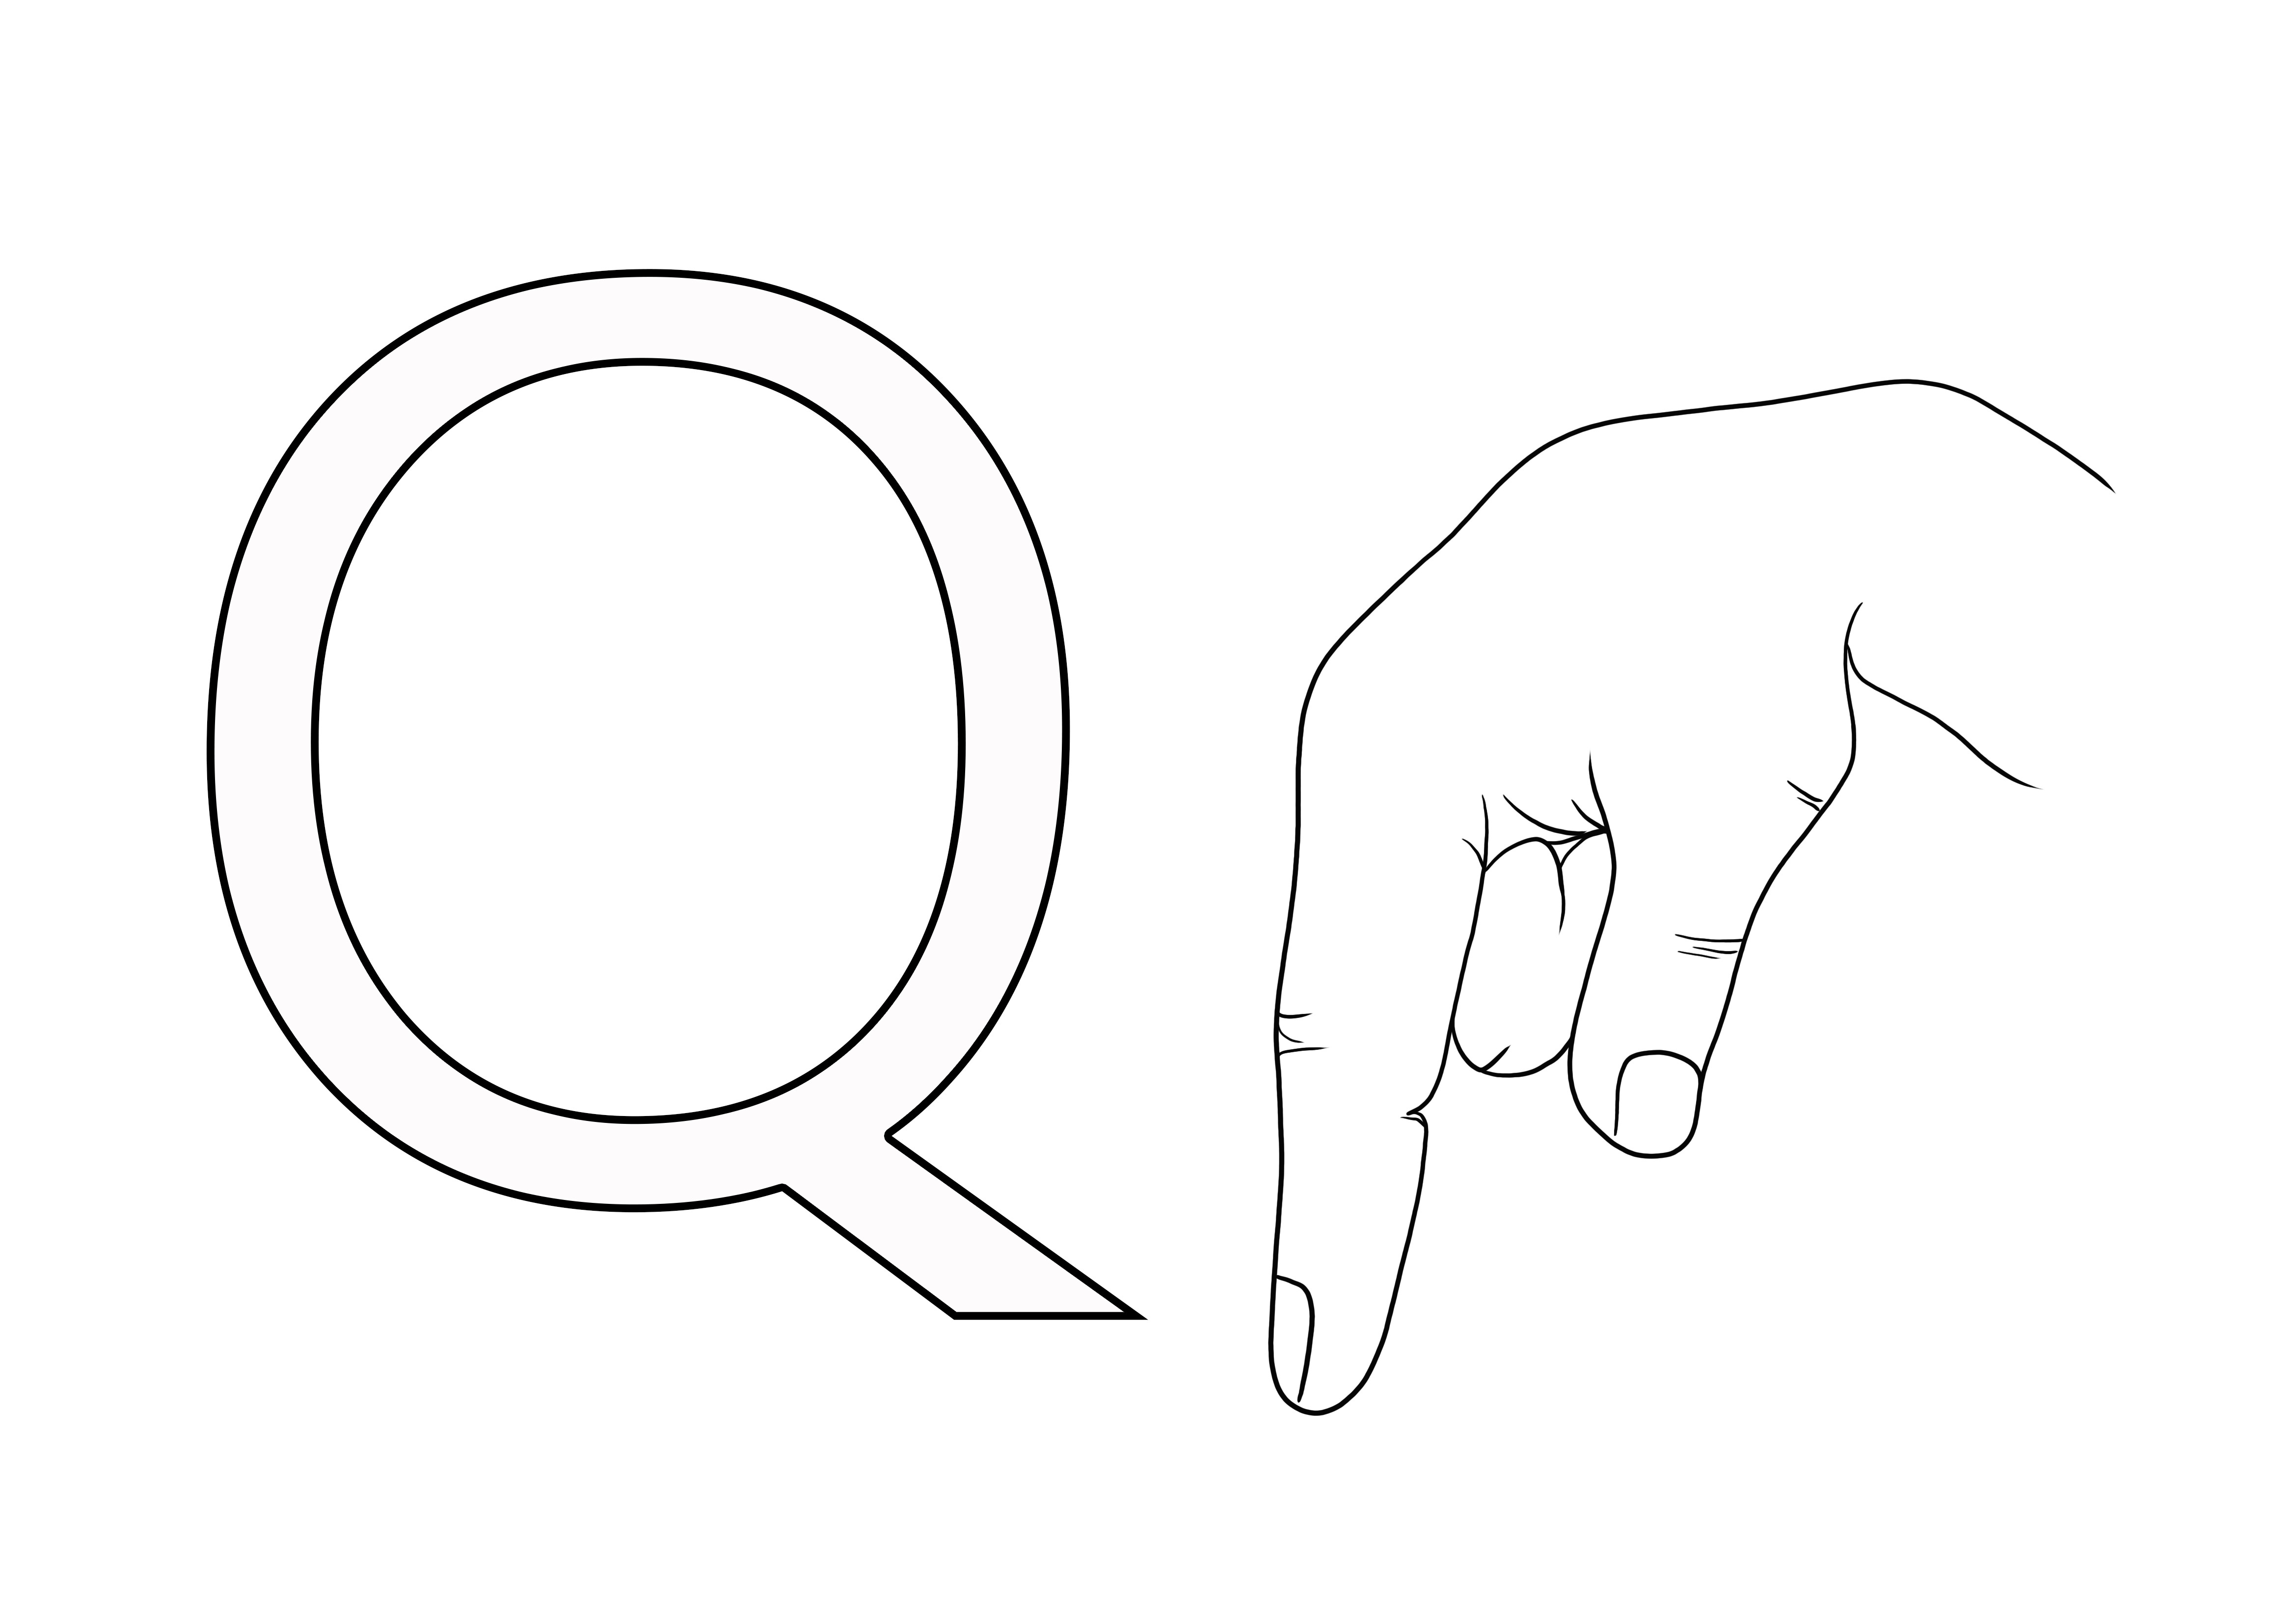 ASL Sign Language Letter Q free printable to color for kids to easily learn the ASL